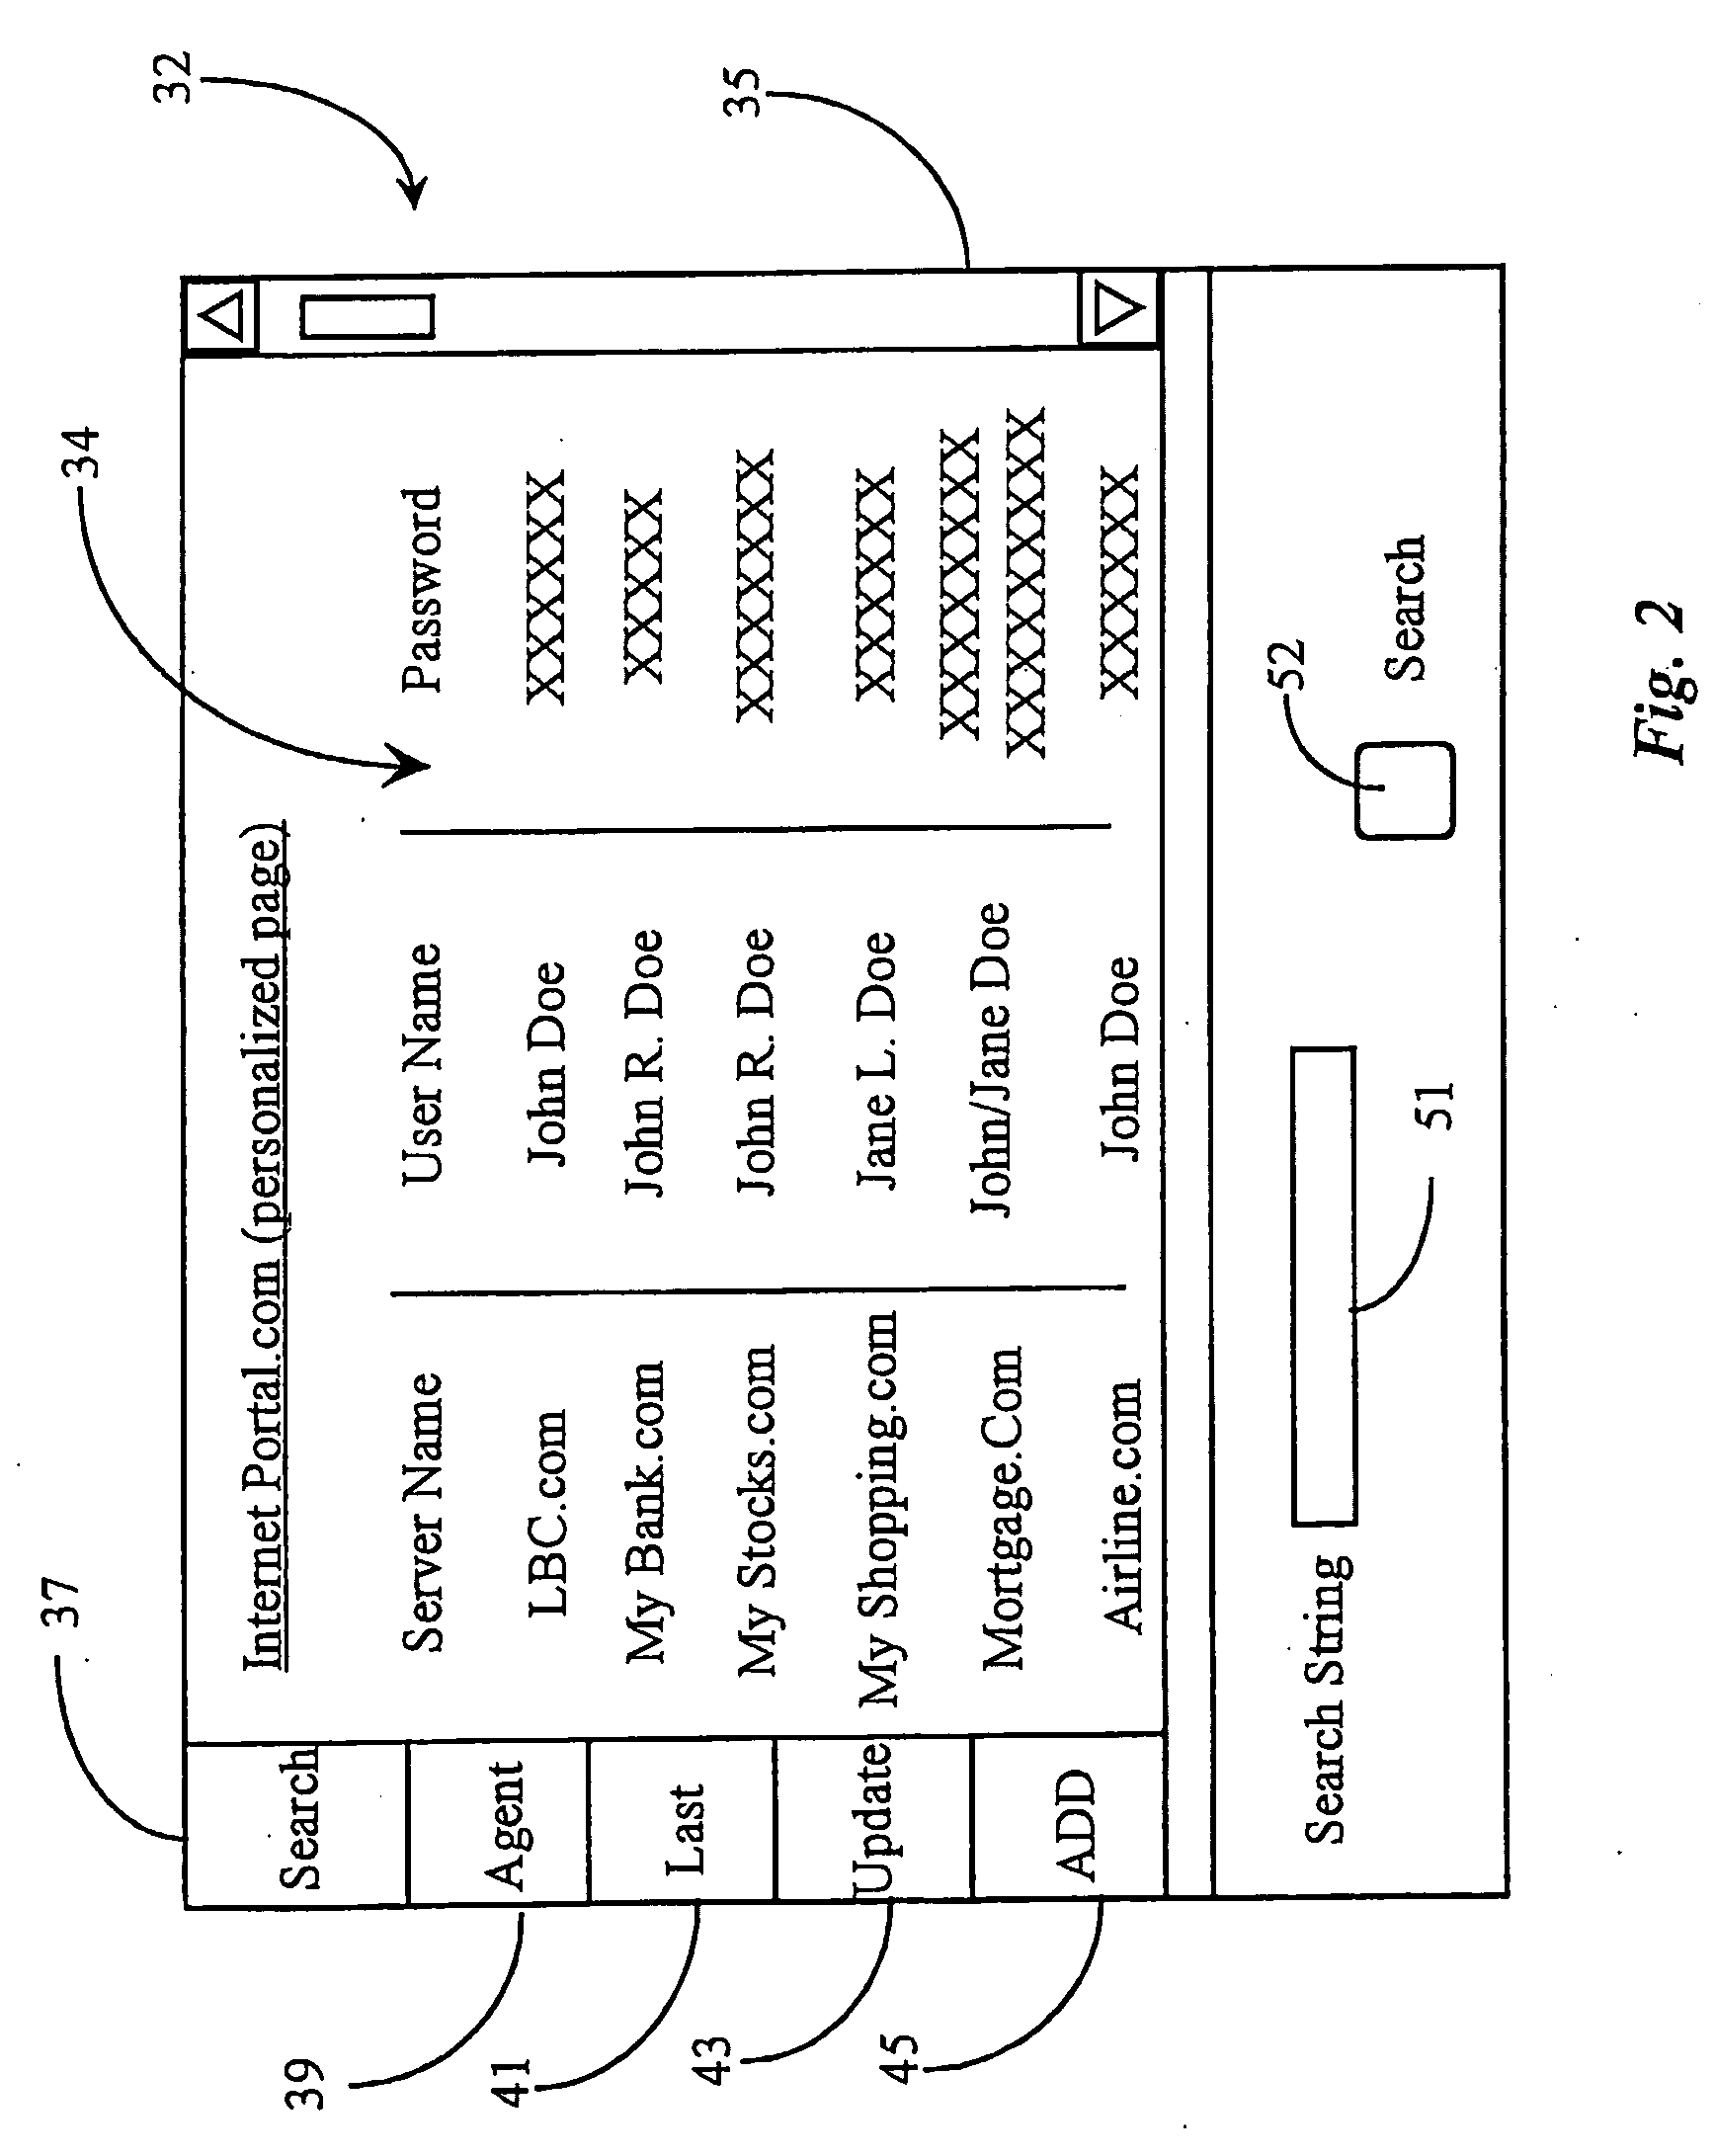 Method and apparatus for detecting changes in websites and reporting results to web developers for navigation template repair purposes